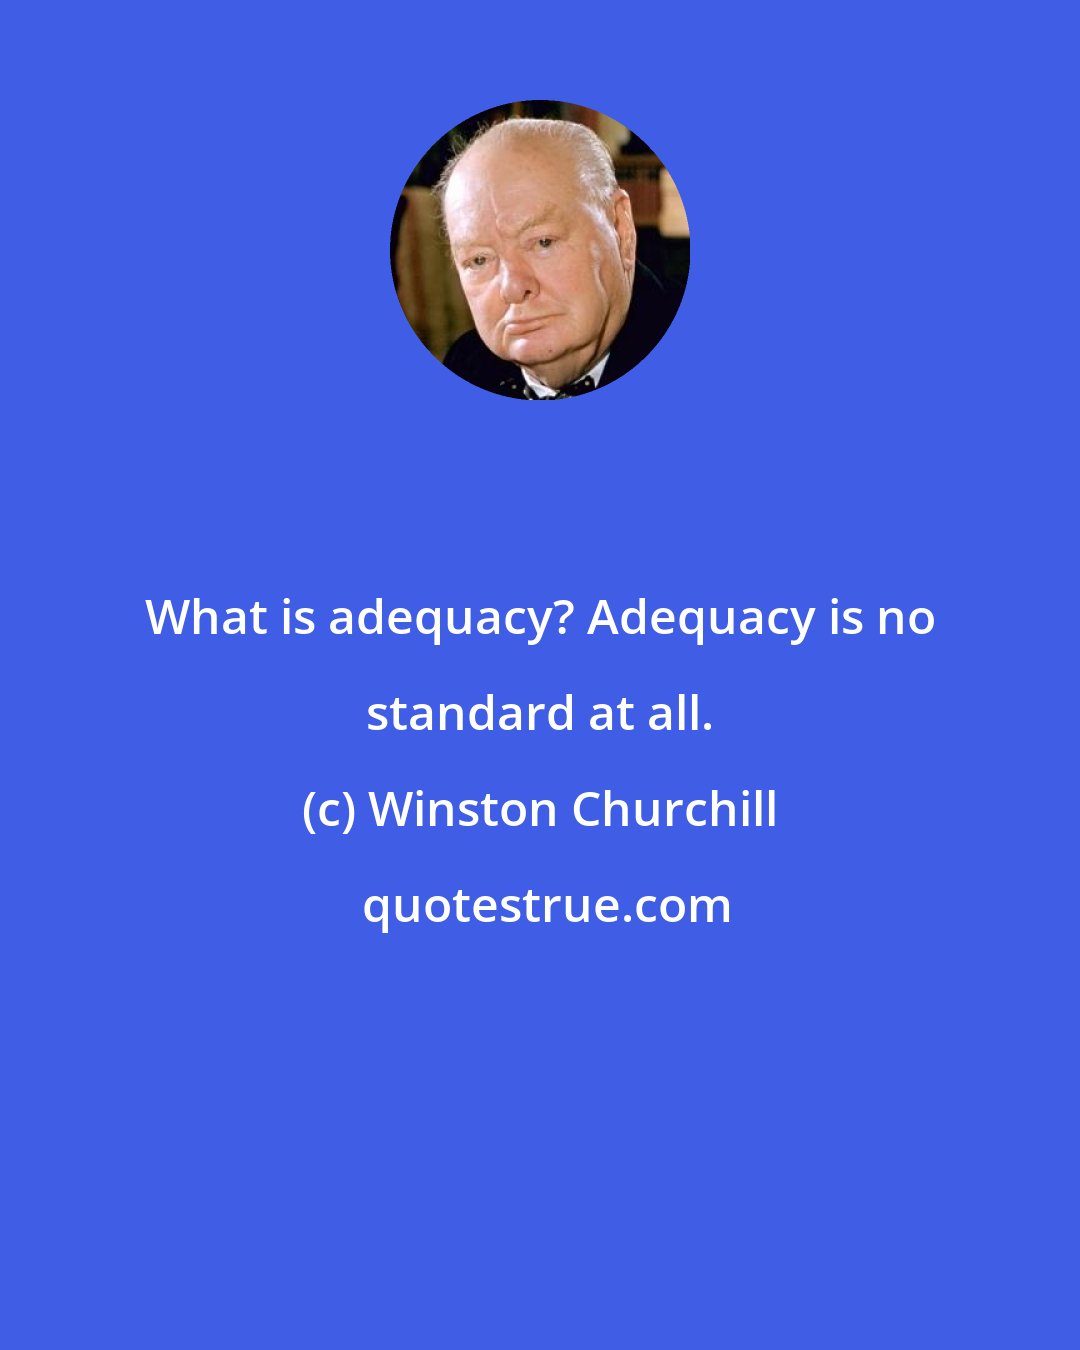 Winston Churchill: What is adequacy? Adequacy is no standard at all.